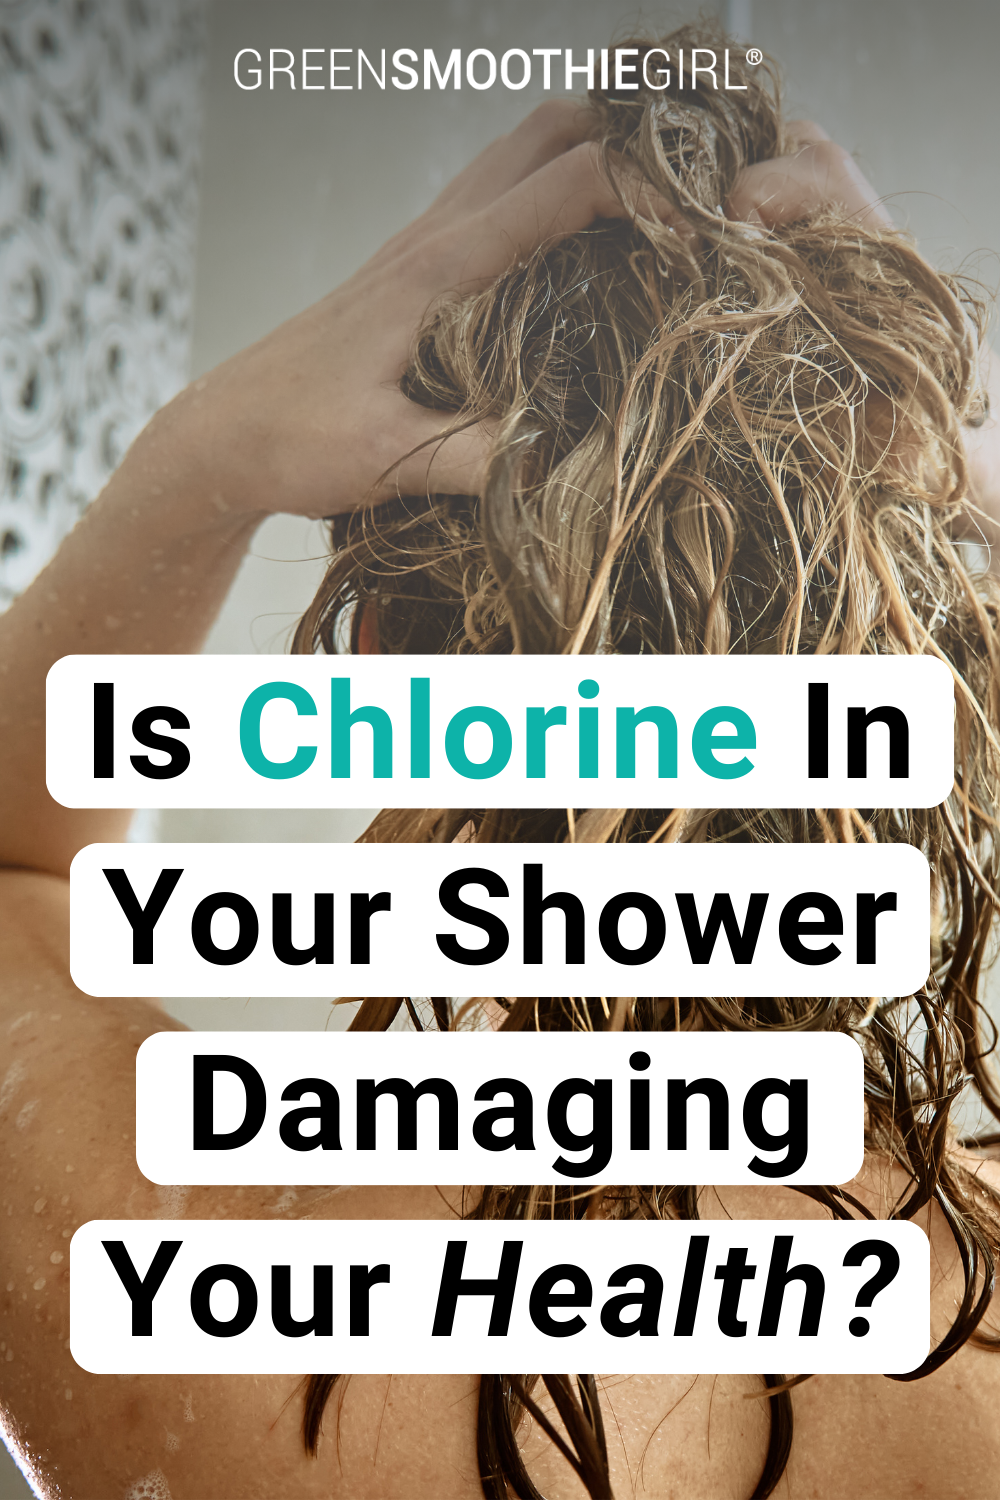 Is chlorine in your shower damaging your health?